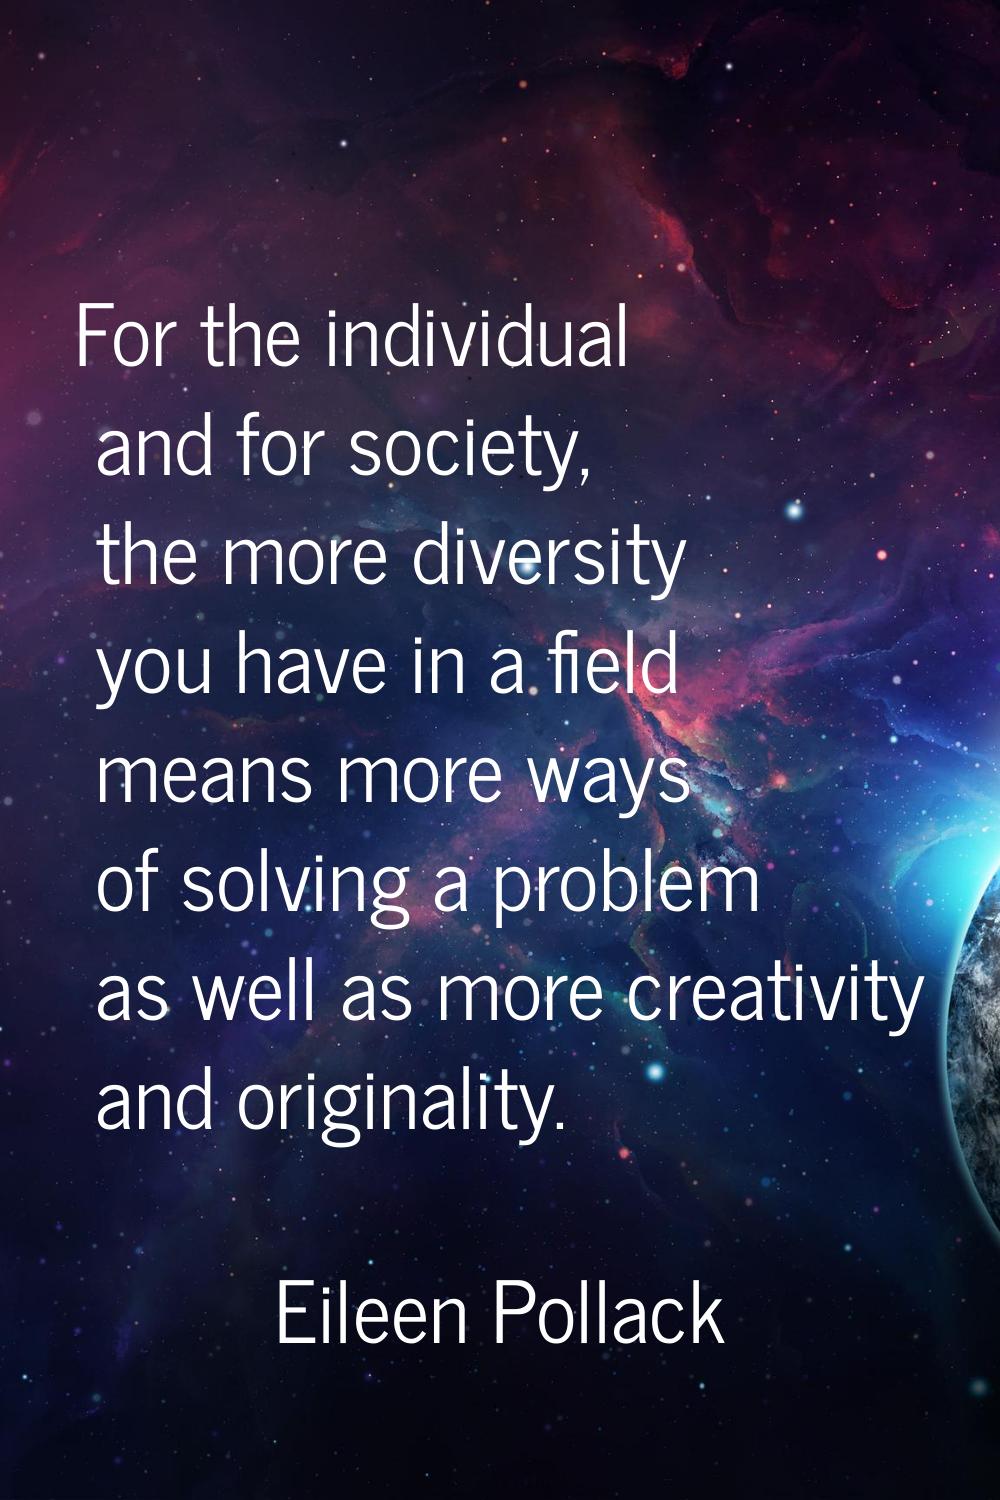 For the individual and for society, the more diversity you have in a field means more ways of solvi